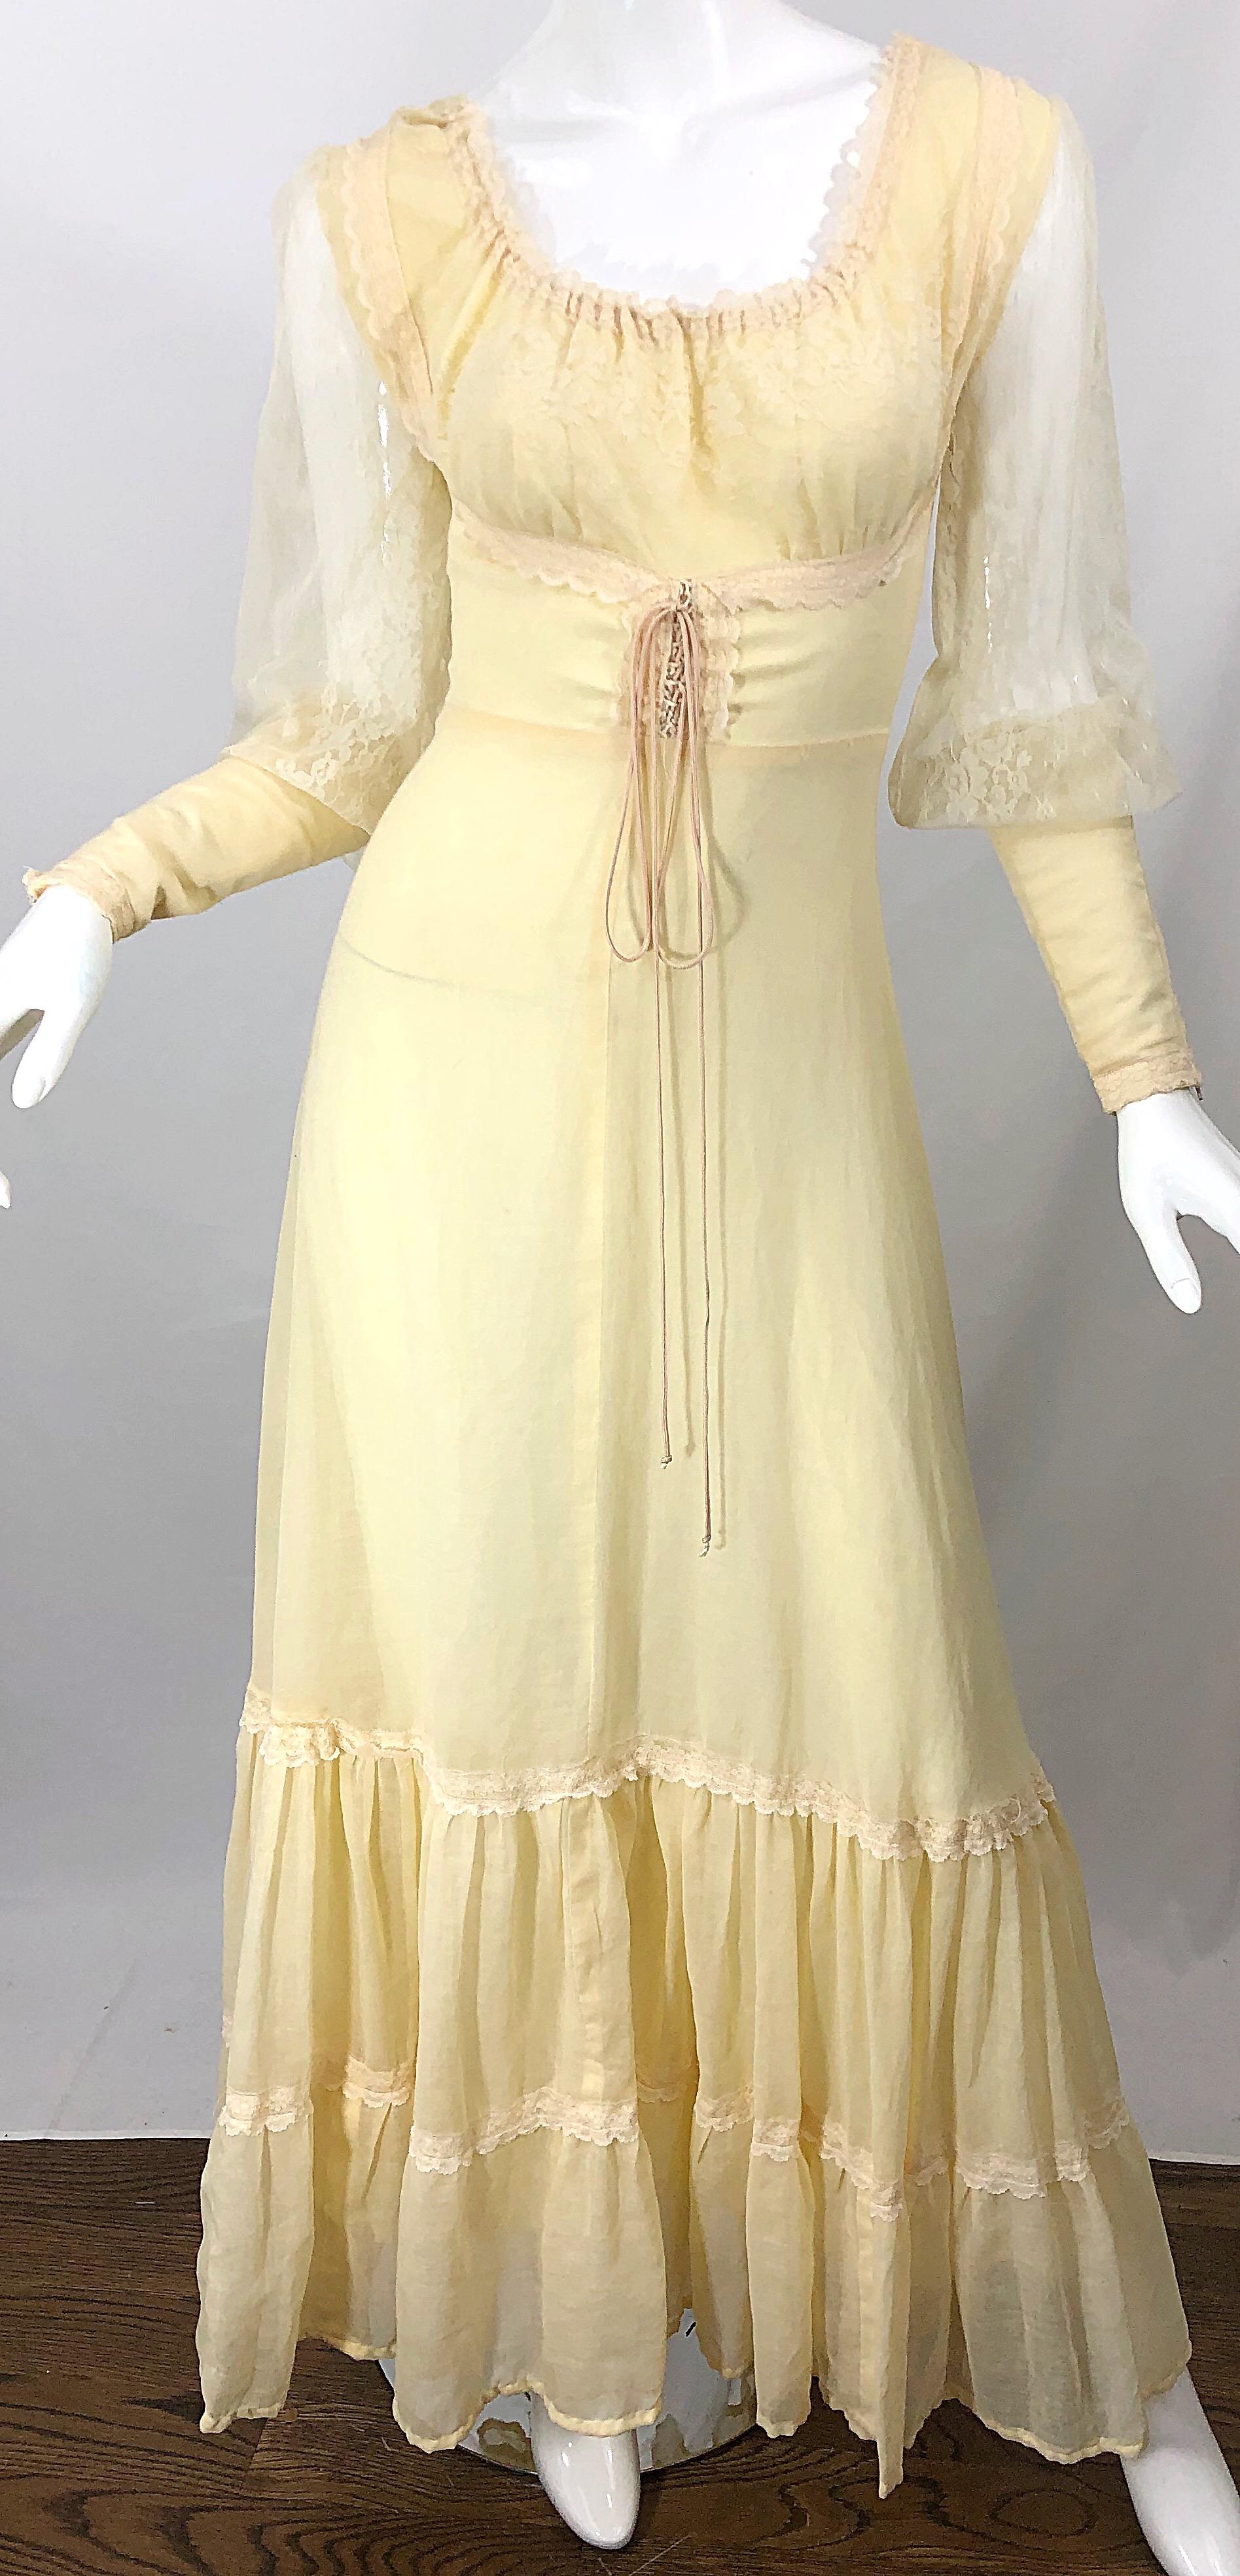 1970s Victorian Inspired Pale Yellow Cotton Voile + Lace Peasant 70s Maxi Dress For Sale 1